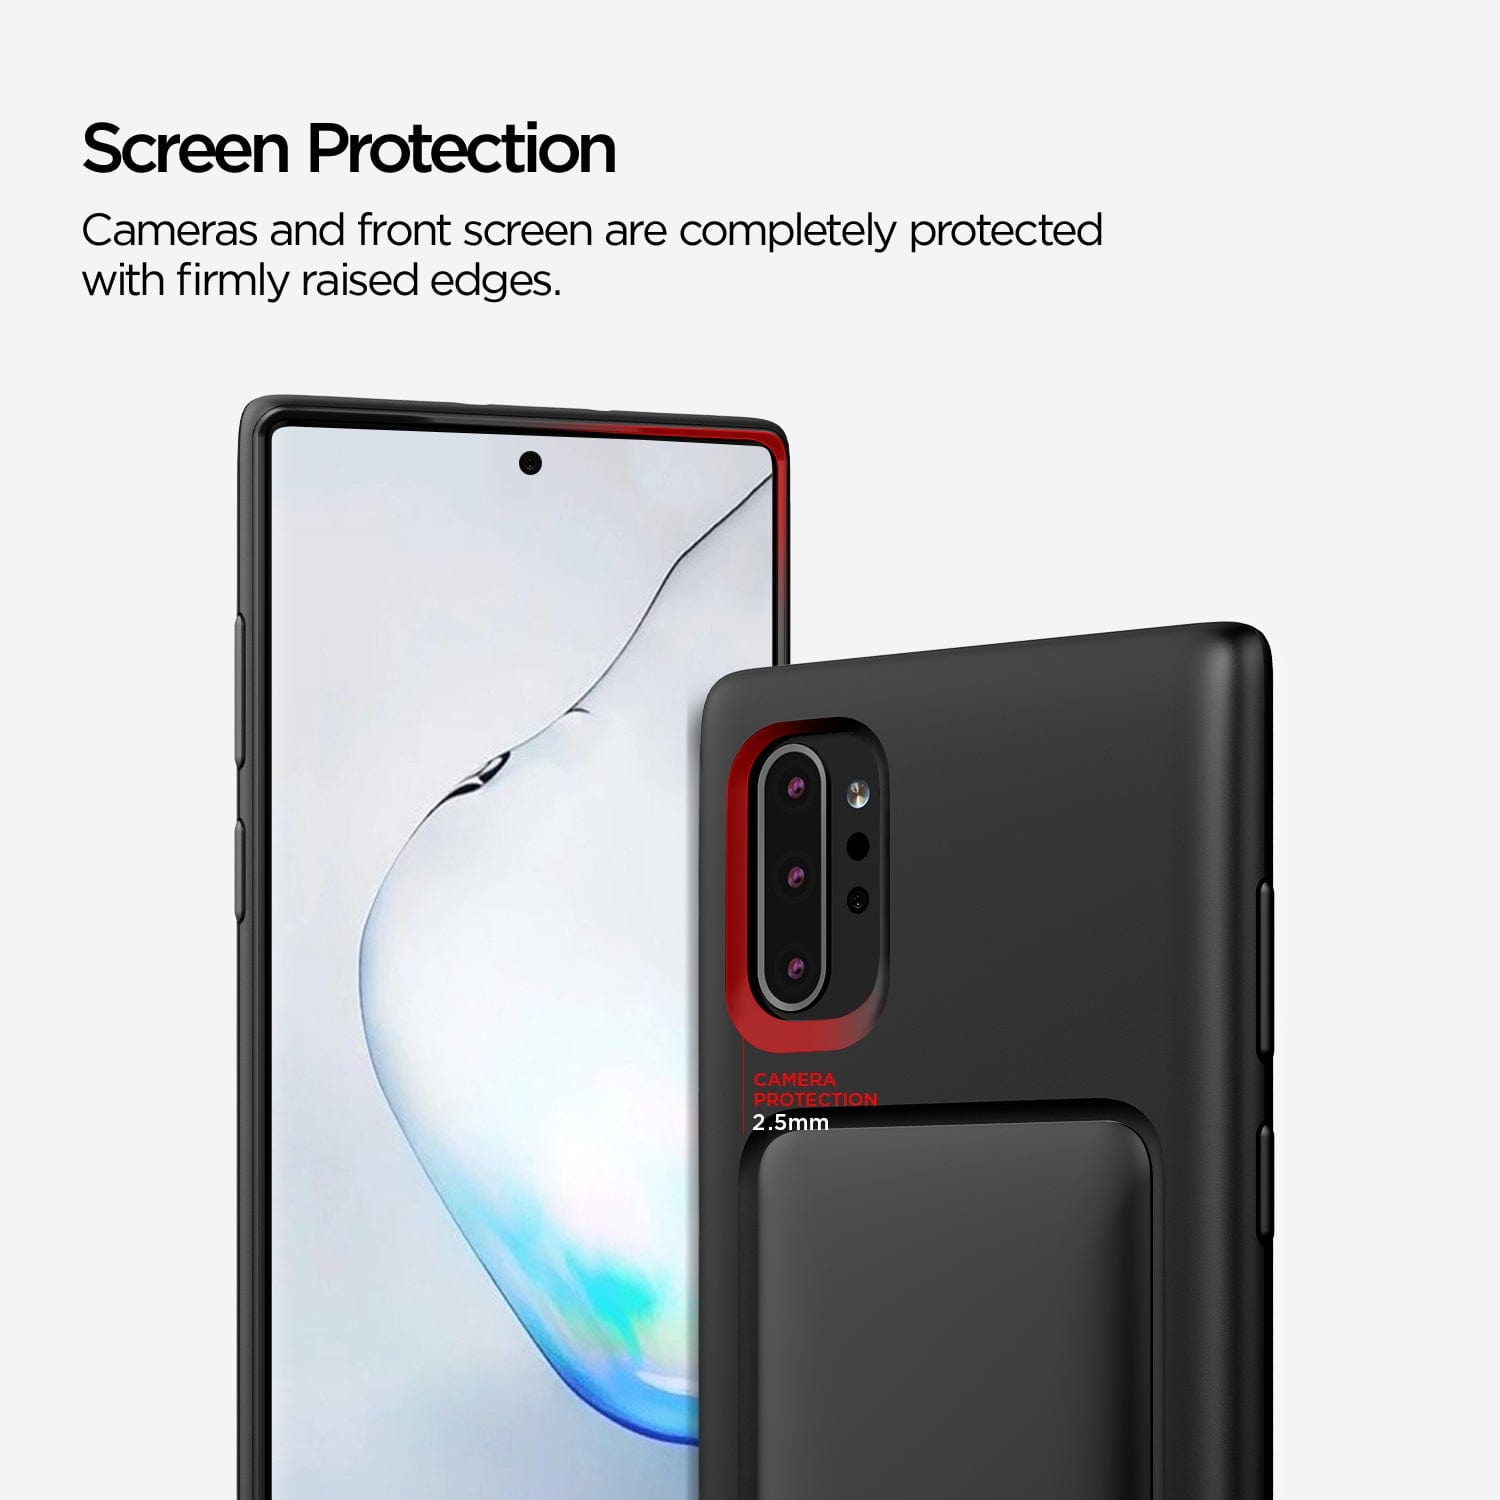 The cameras and front screen are fully shielded, with sturdy raised edges for maximum protection.